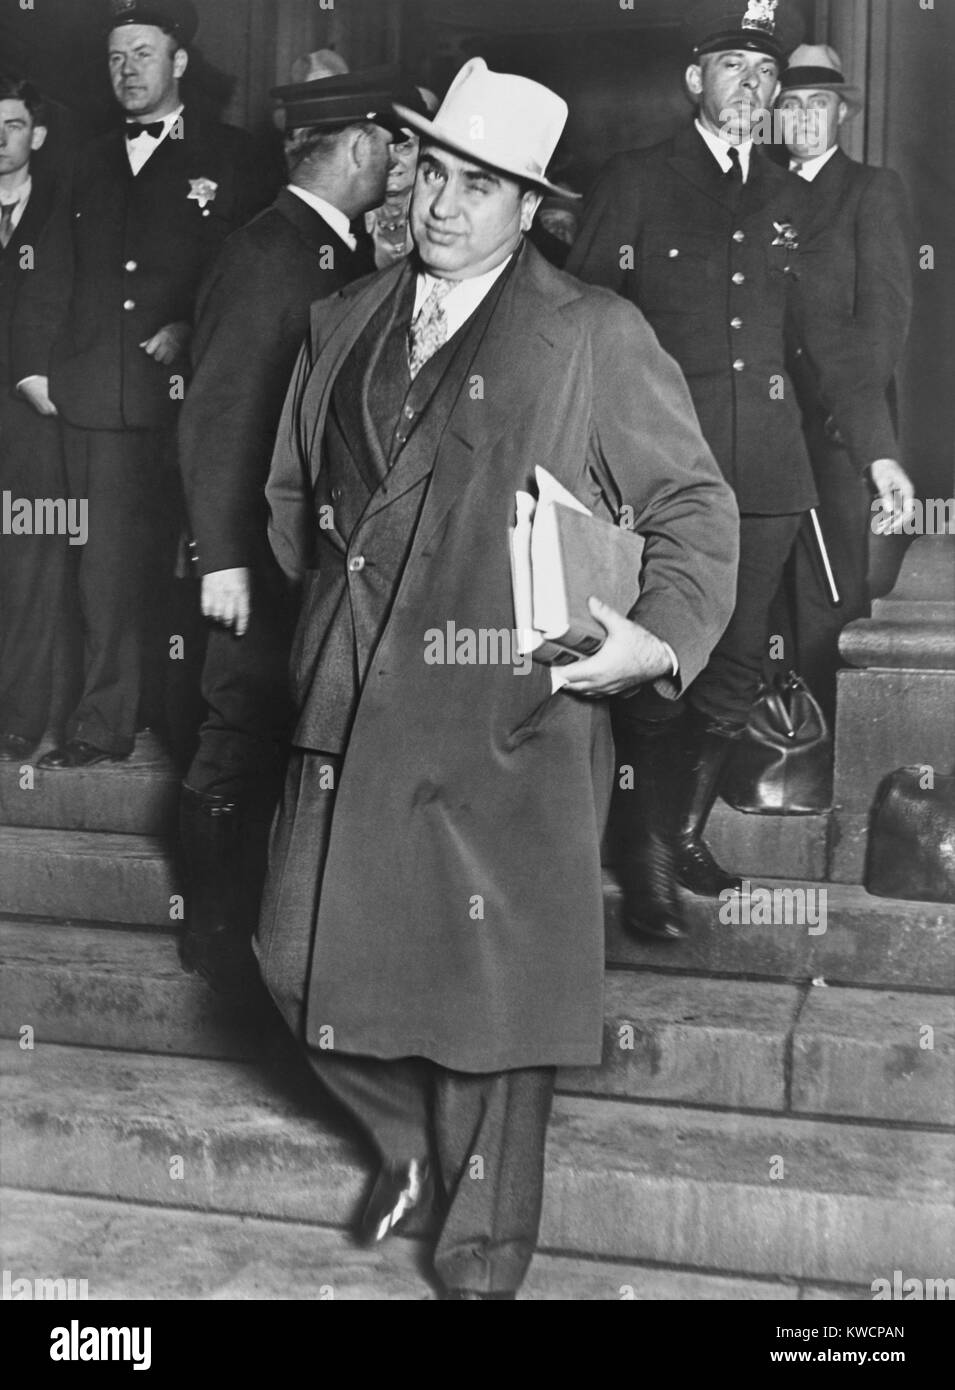 Al Capone, winks at photographers as he leaves Chicago's federal courthouse. October 14, 1931. The notorious Chicago gangster was on trial for tax evasion. - (BSLOC 2015 1 13) Stock Photo